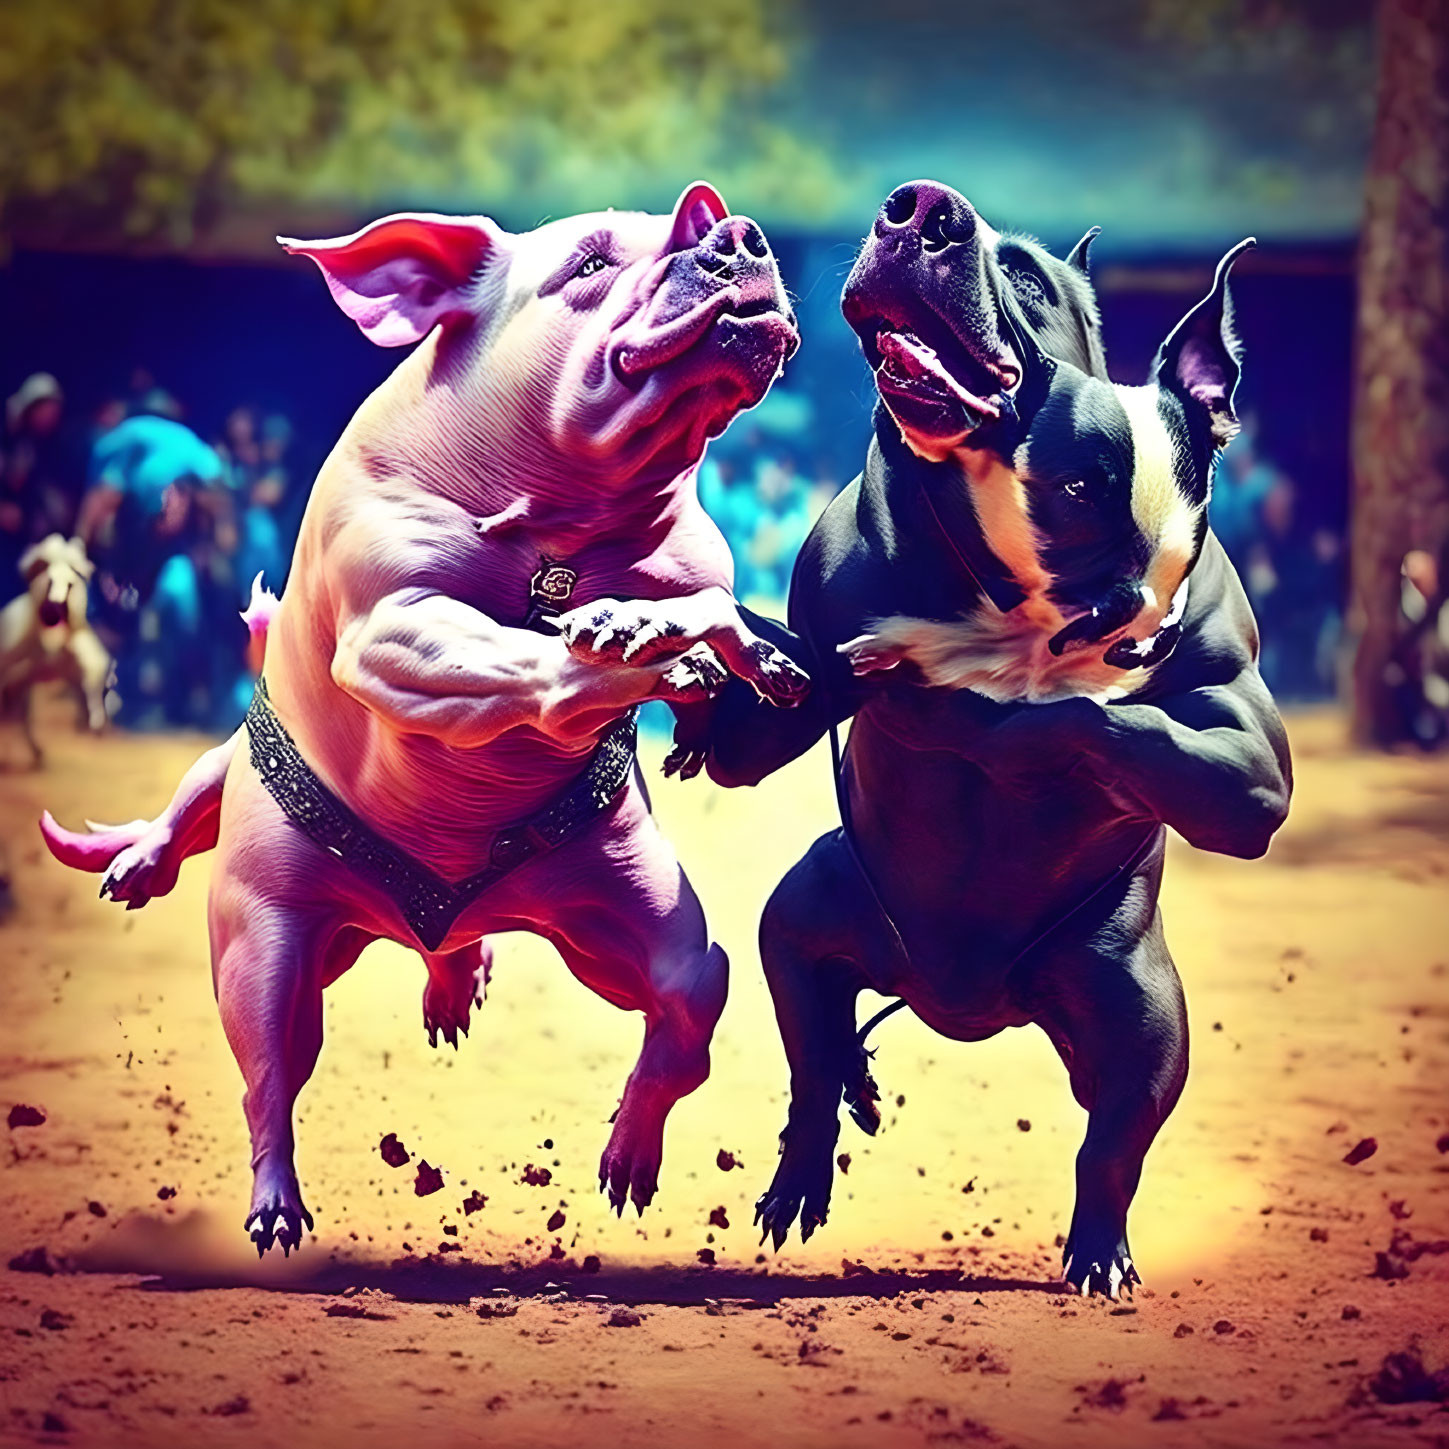 Anthropomorphized pigs wrestling in a ring with audience